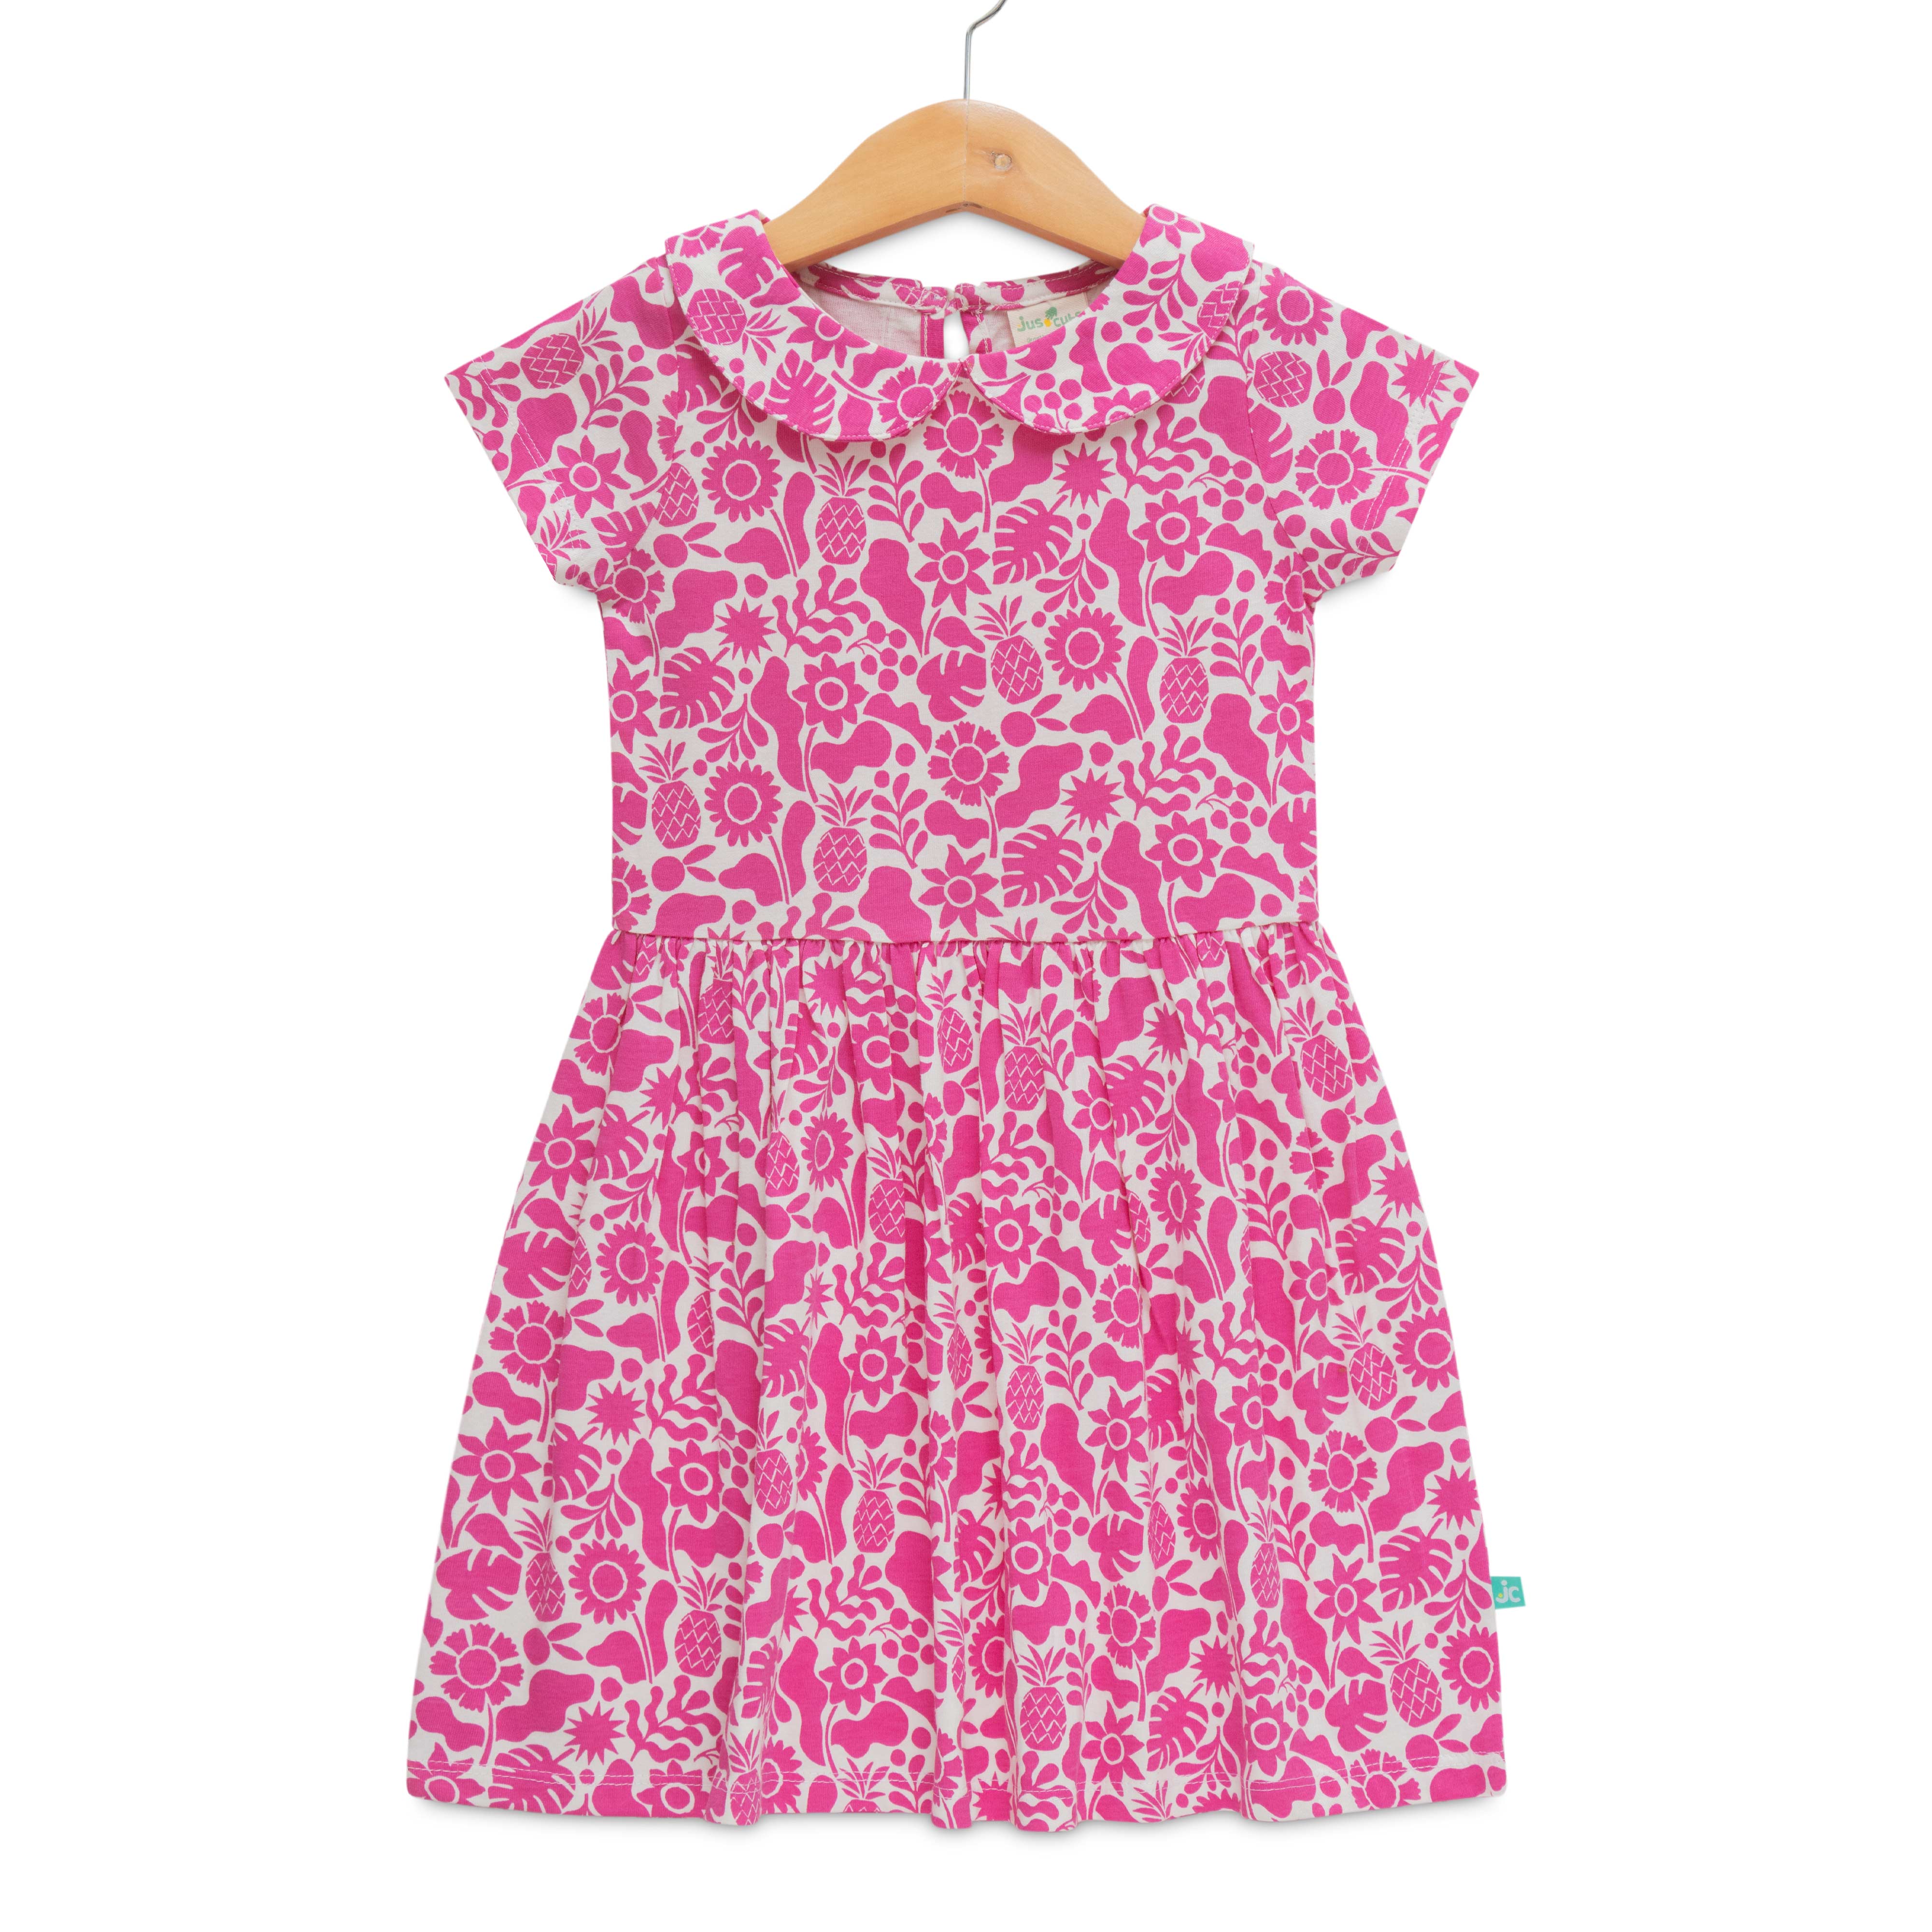 Girls Floral Printed Peter Pan Neck Fit & Flare Dress